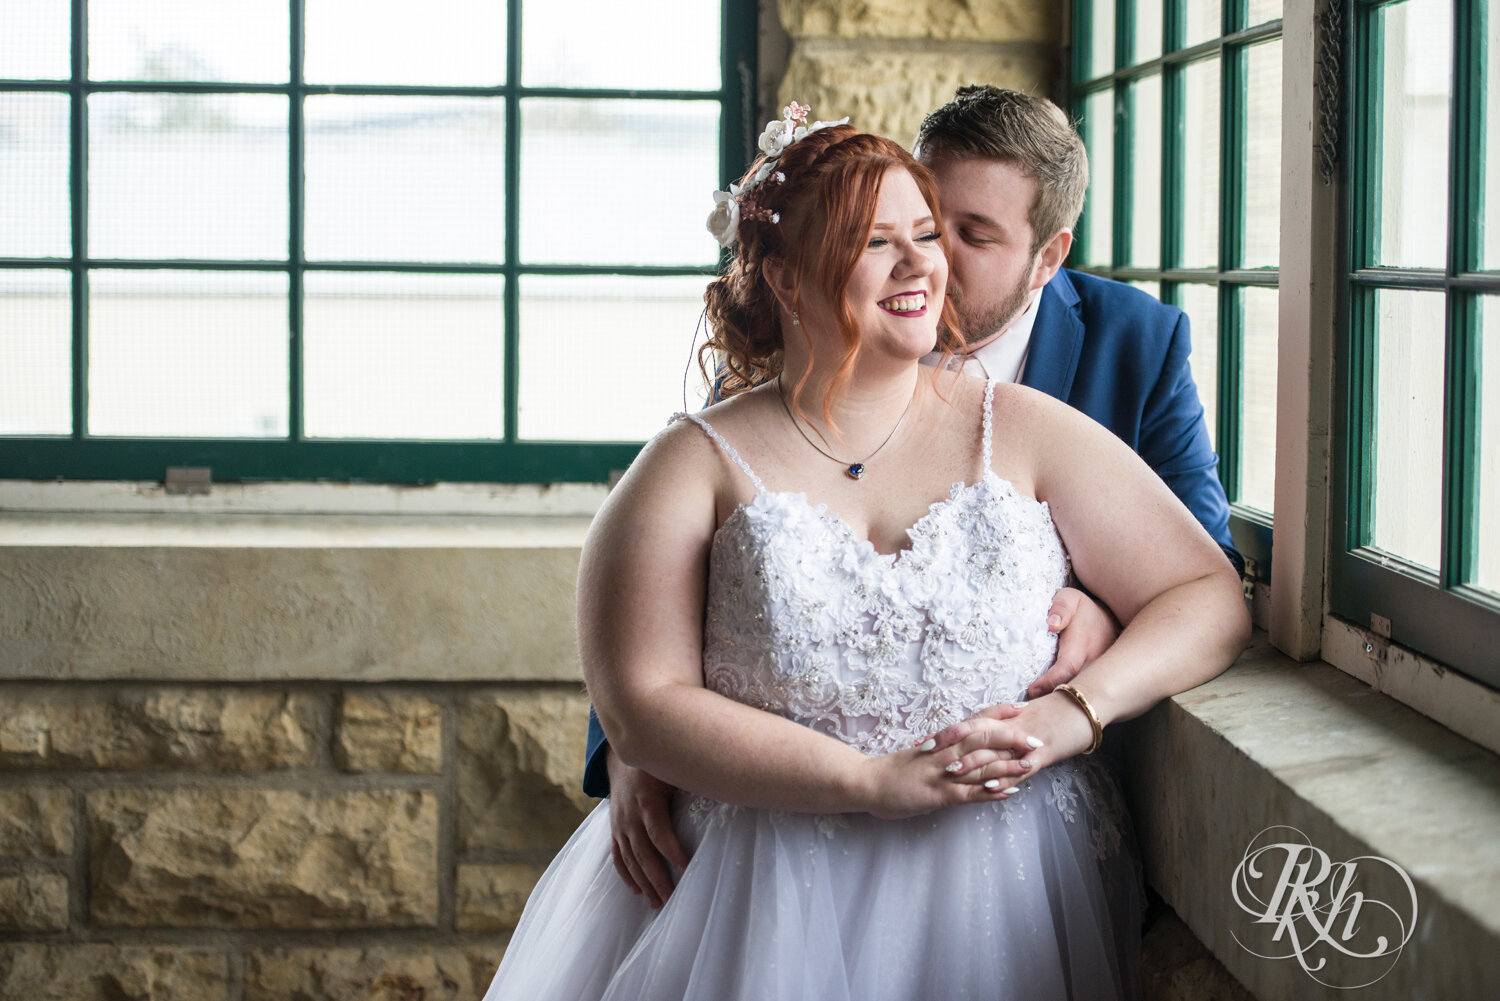 Plus size bride and groom kiss by window at wedding at Olmsted County Fairgrounds in Rochester, Minnesota.